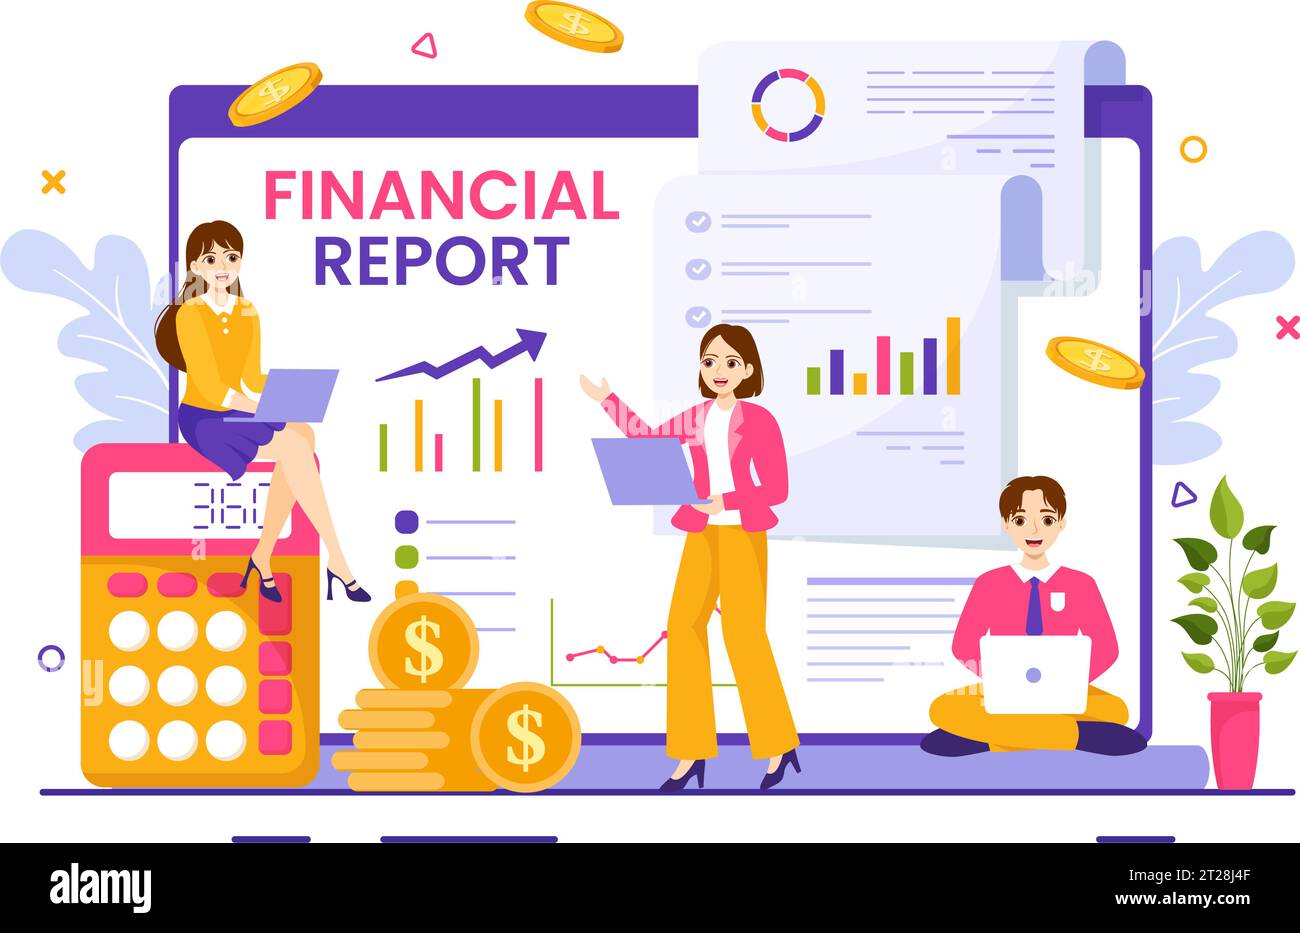 Financial Report Vector Illustration with Data Charts, Graphs and Diagrams on Finance Transaction, Analysis and Statistic Online in Flat Background Stock Vector